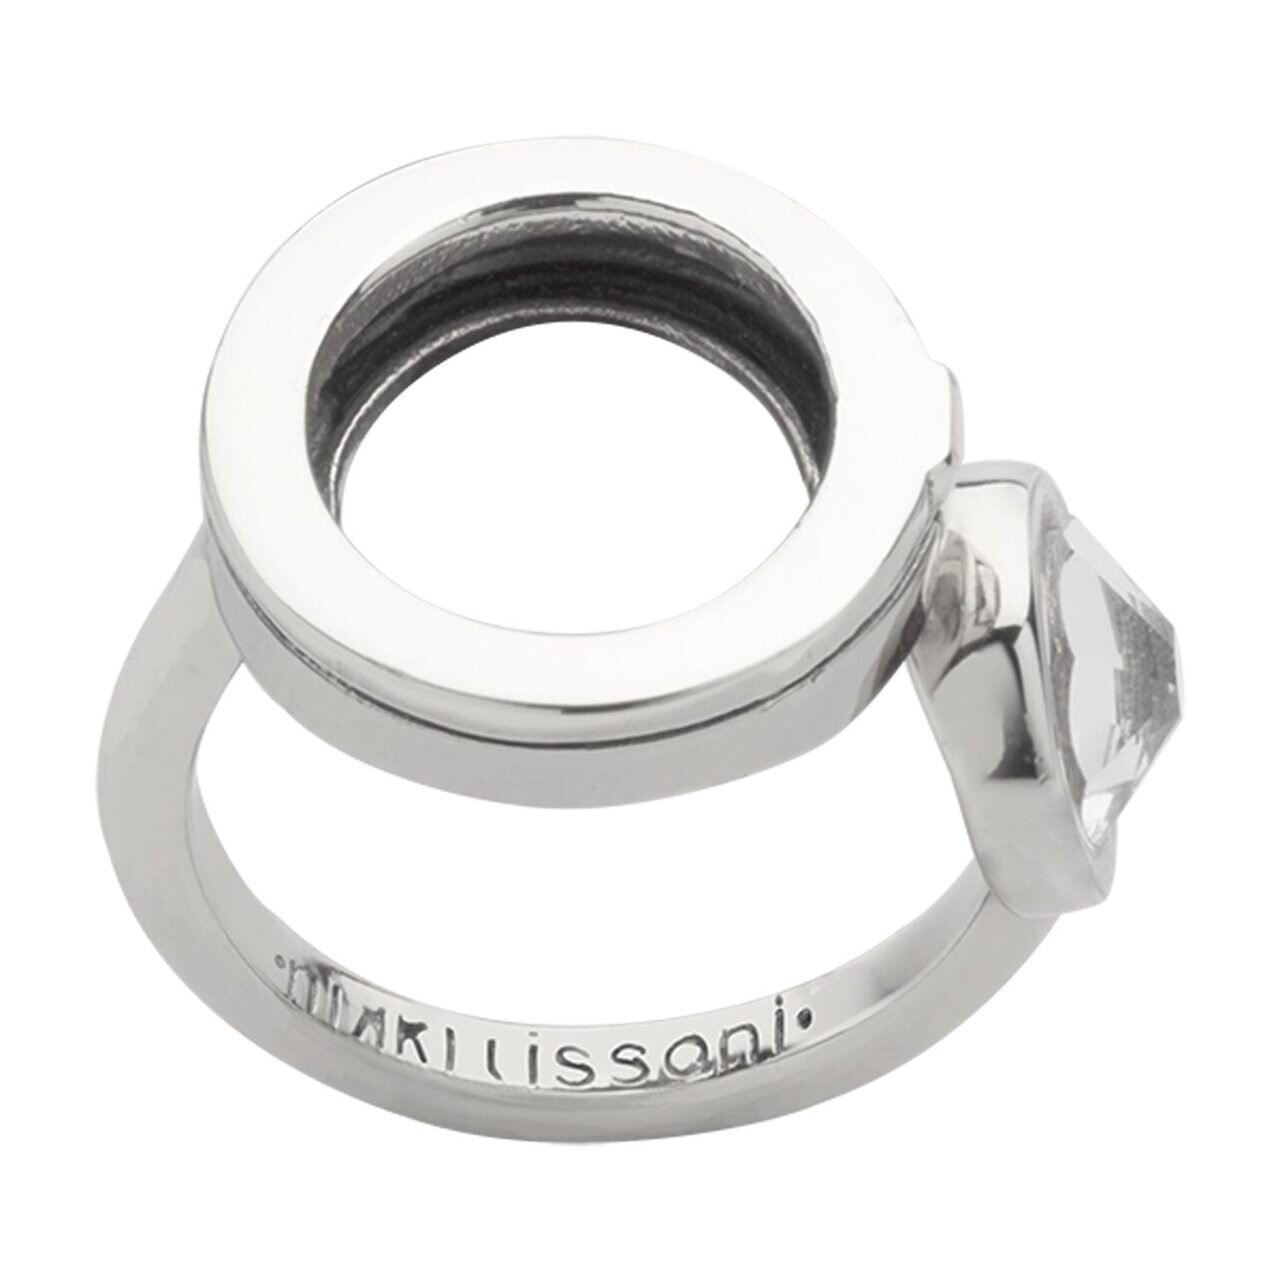 Nikki Lissoni Interchangeable Open Ring with Swarovski Stone Silver-plated Size 8 R1007S8